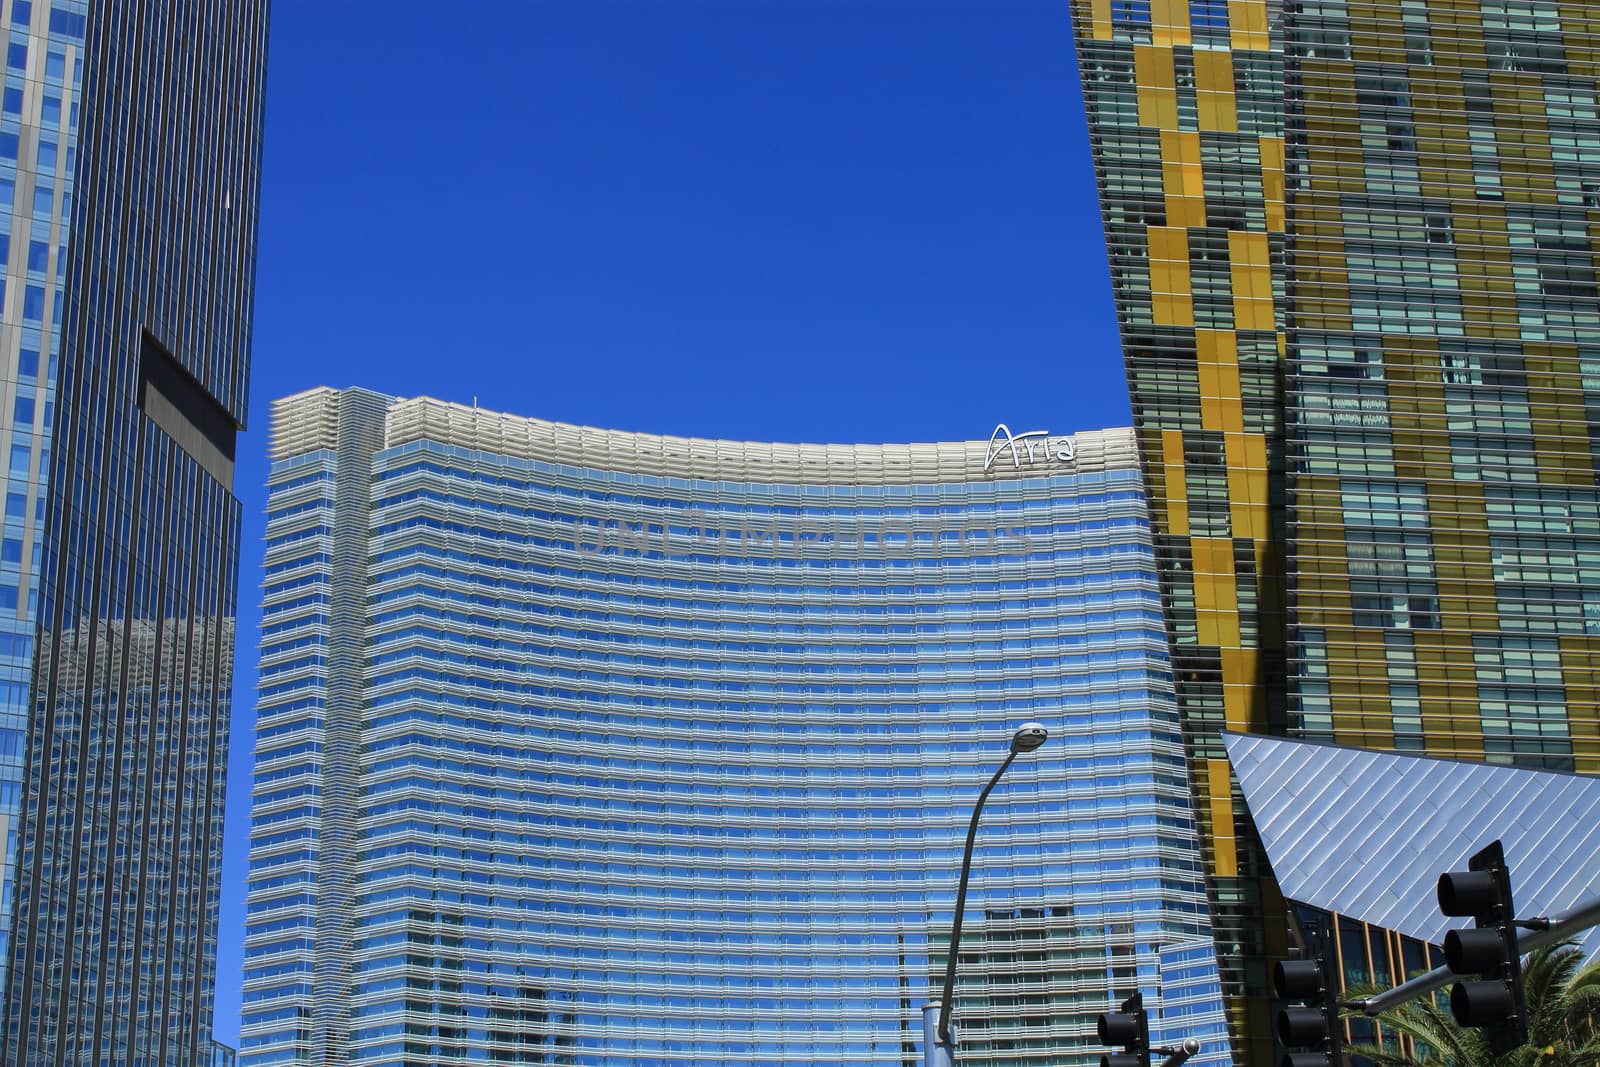 Las Vegas Aria Hotel by Ffooter